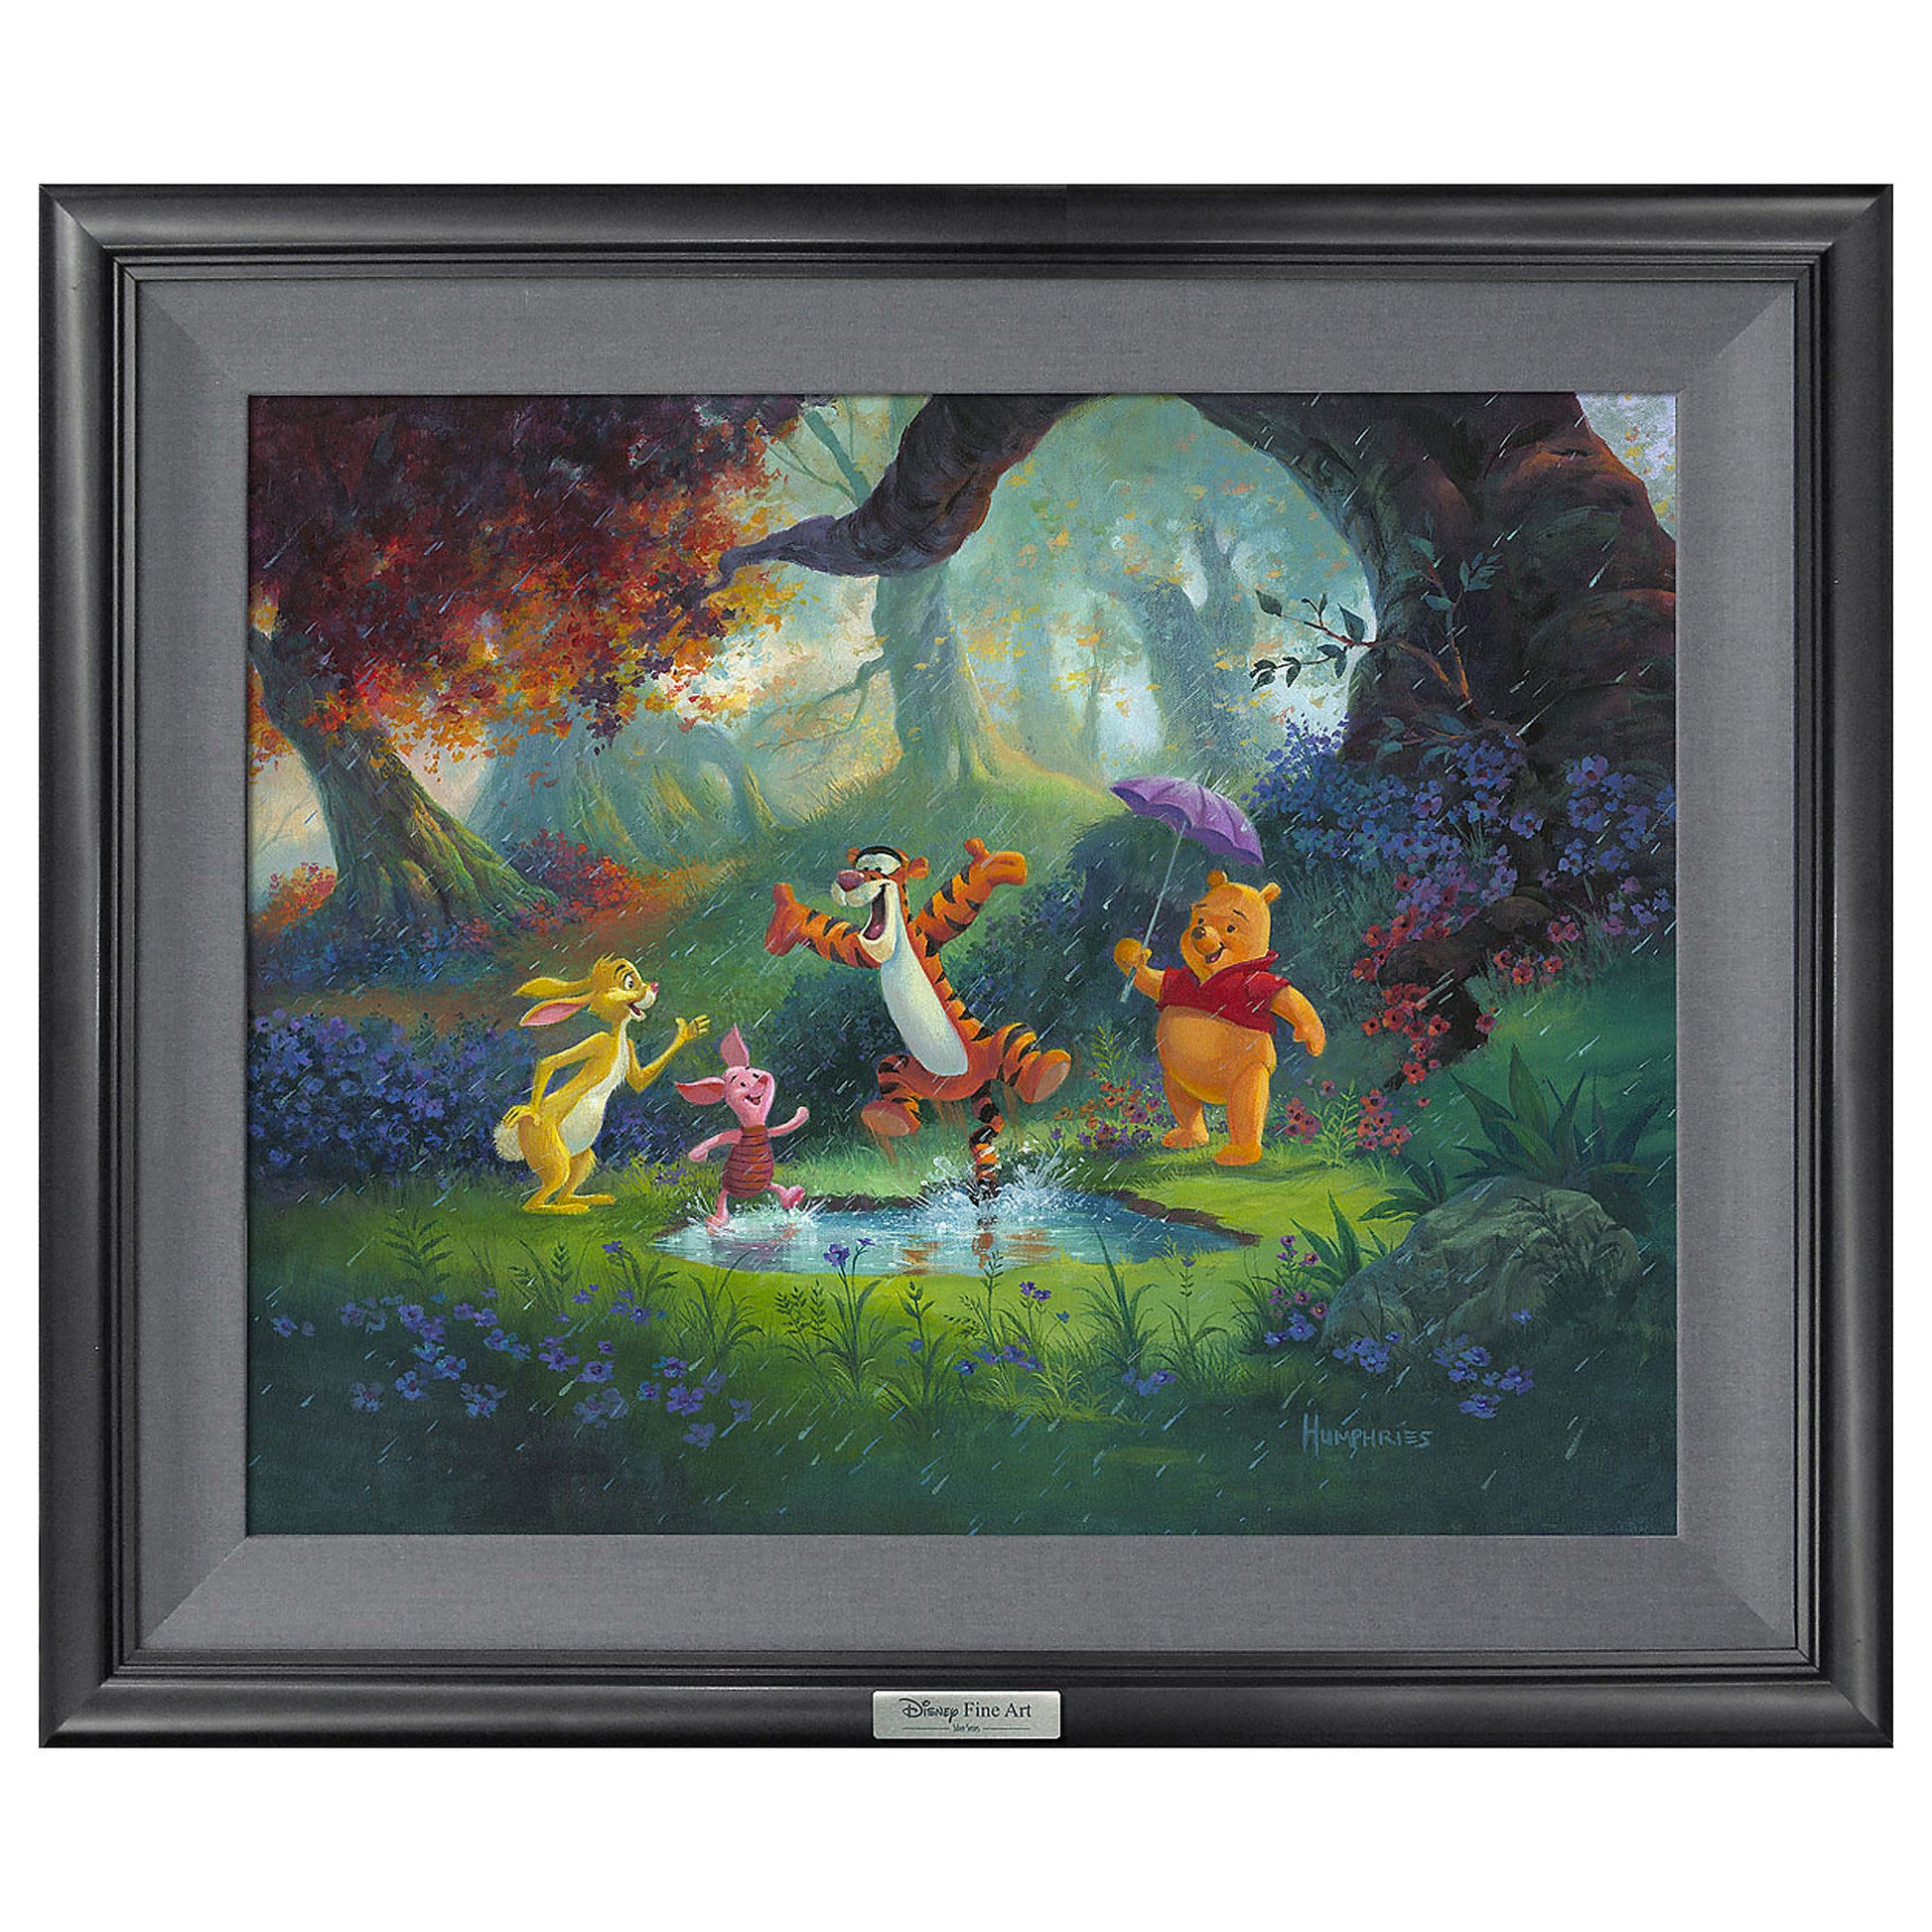 Michael Humphries Disney "Puddle Jumping" Limited Edition Canvas Giclee